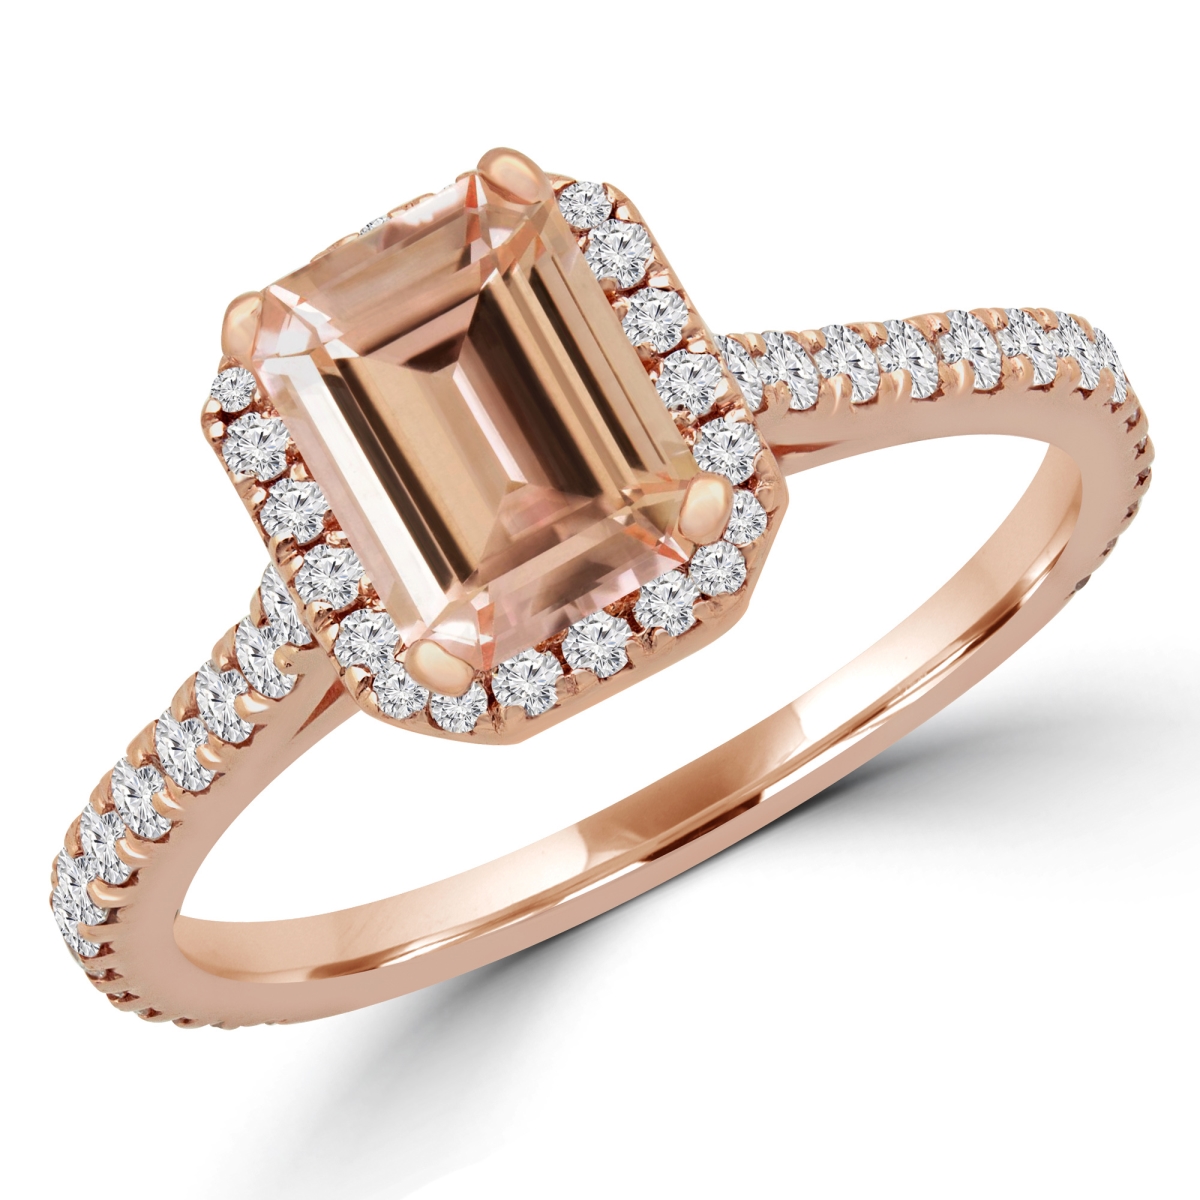 Picture of Majesty Diamonds MD180580-3.5 1.25 CTW Emerald Pink Morganite Halo Engagement Ring in 14K Rose Gold - Size 3.5